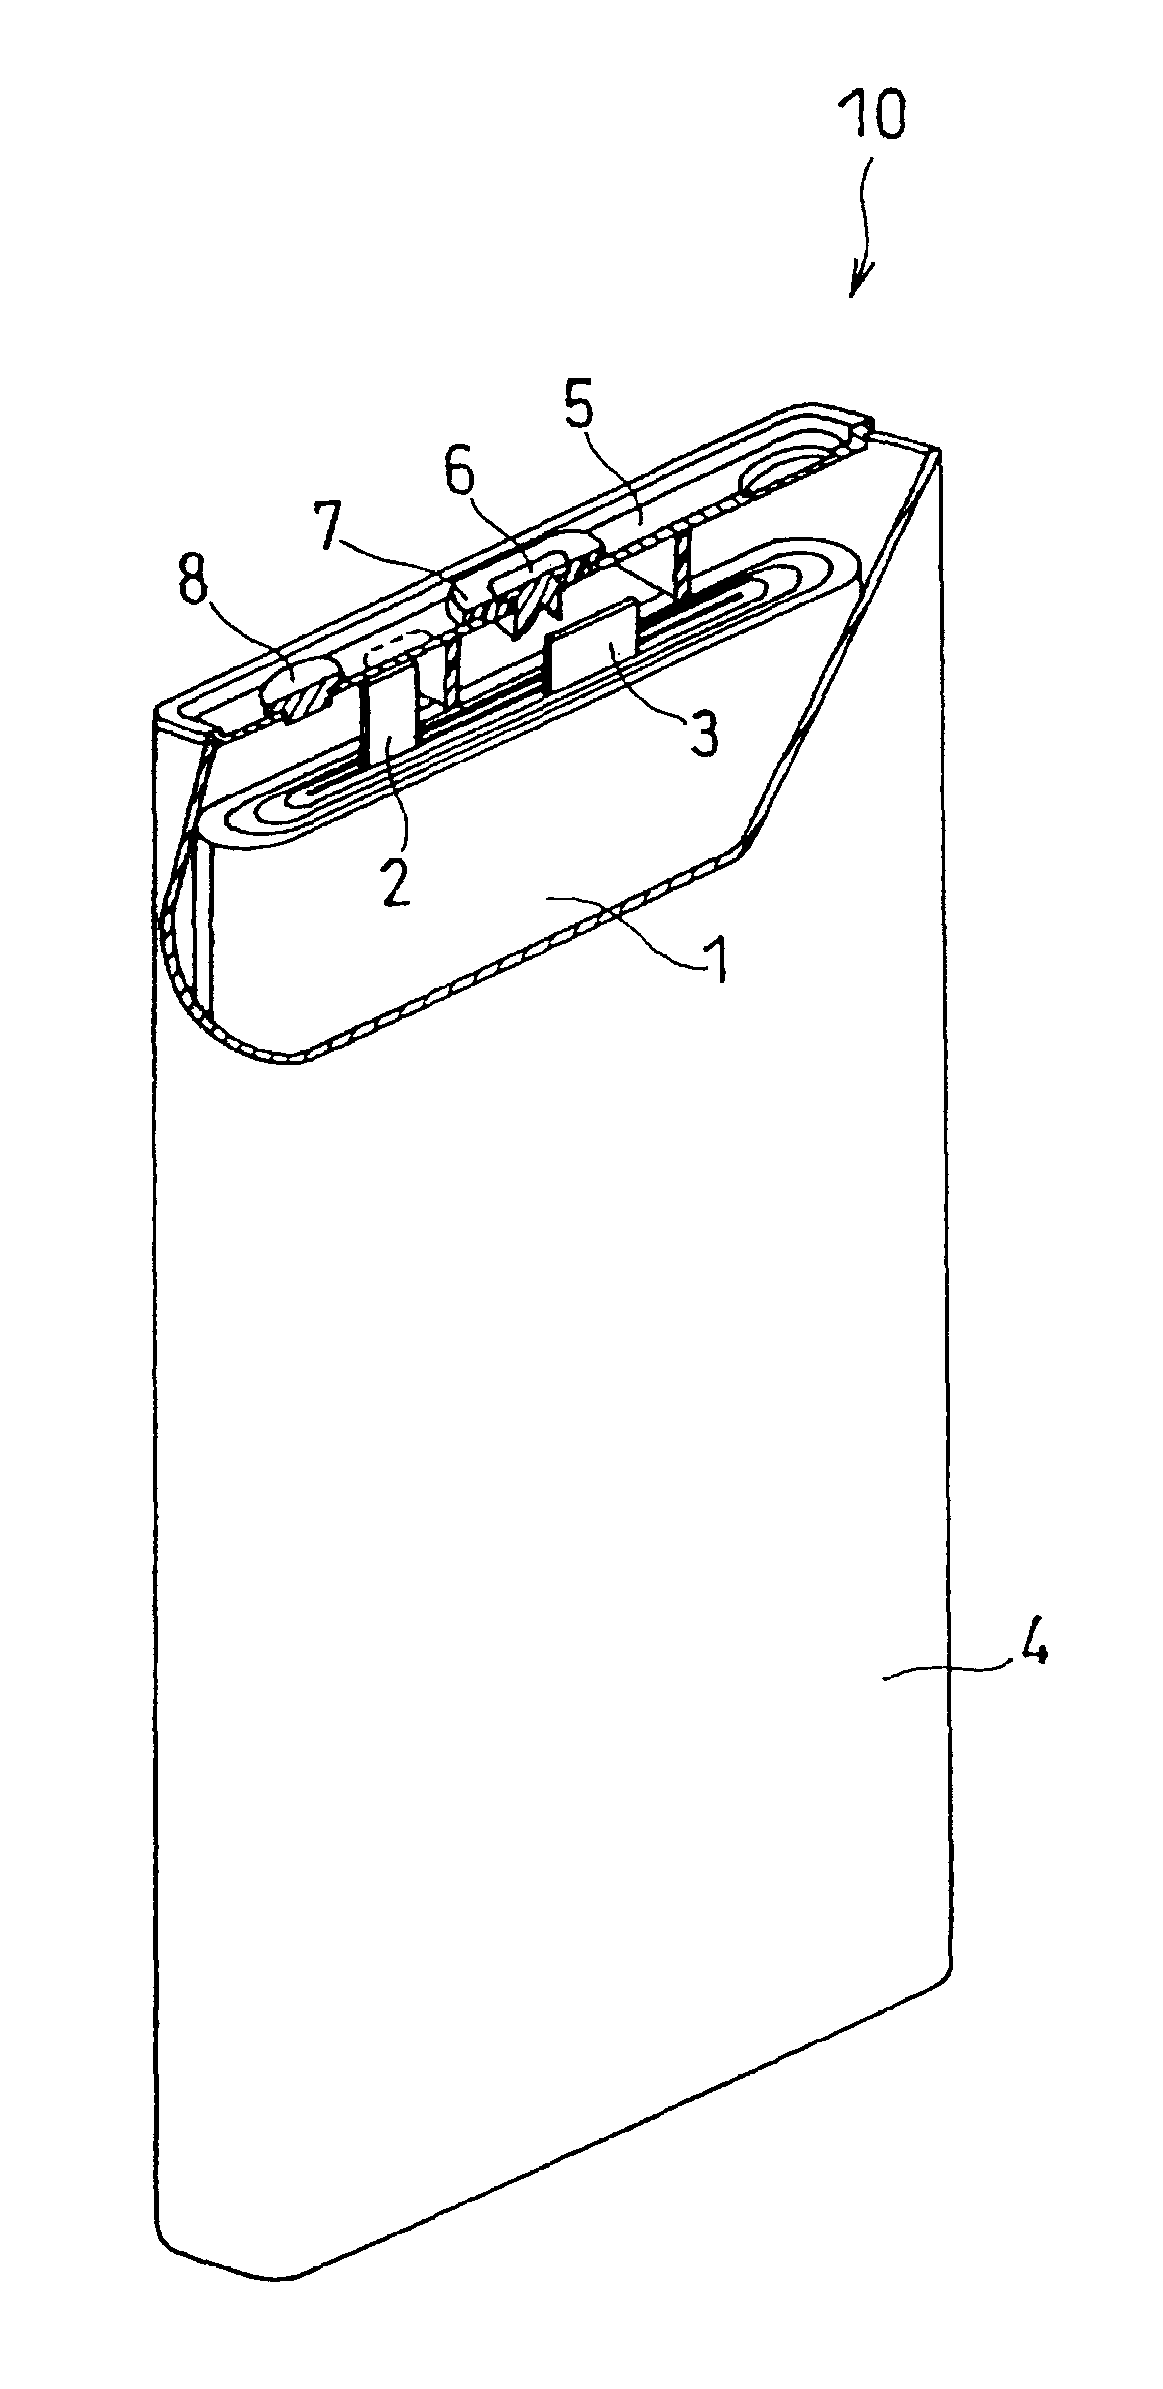 Nonaqueous electrolyte secondary battery and method for fabricating the same